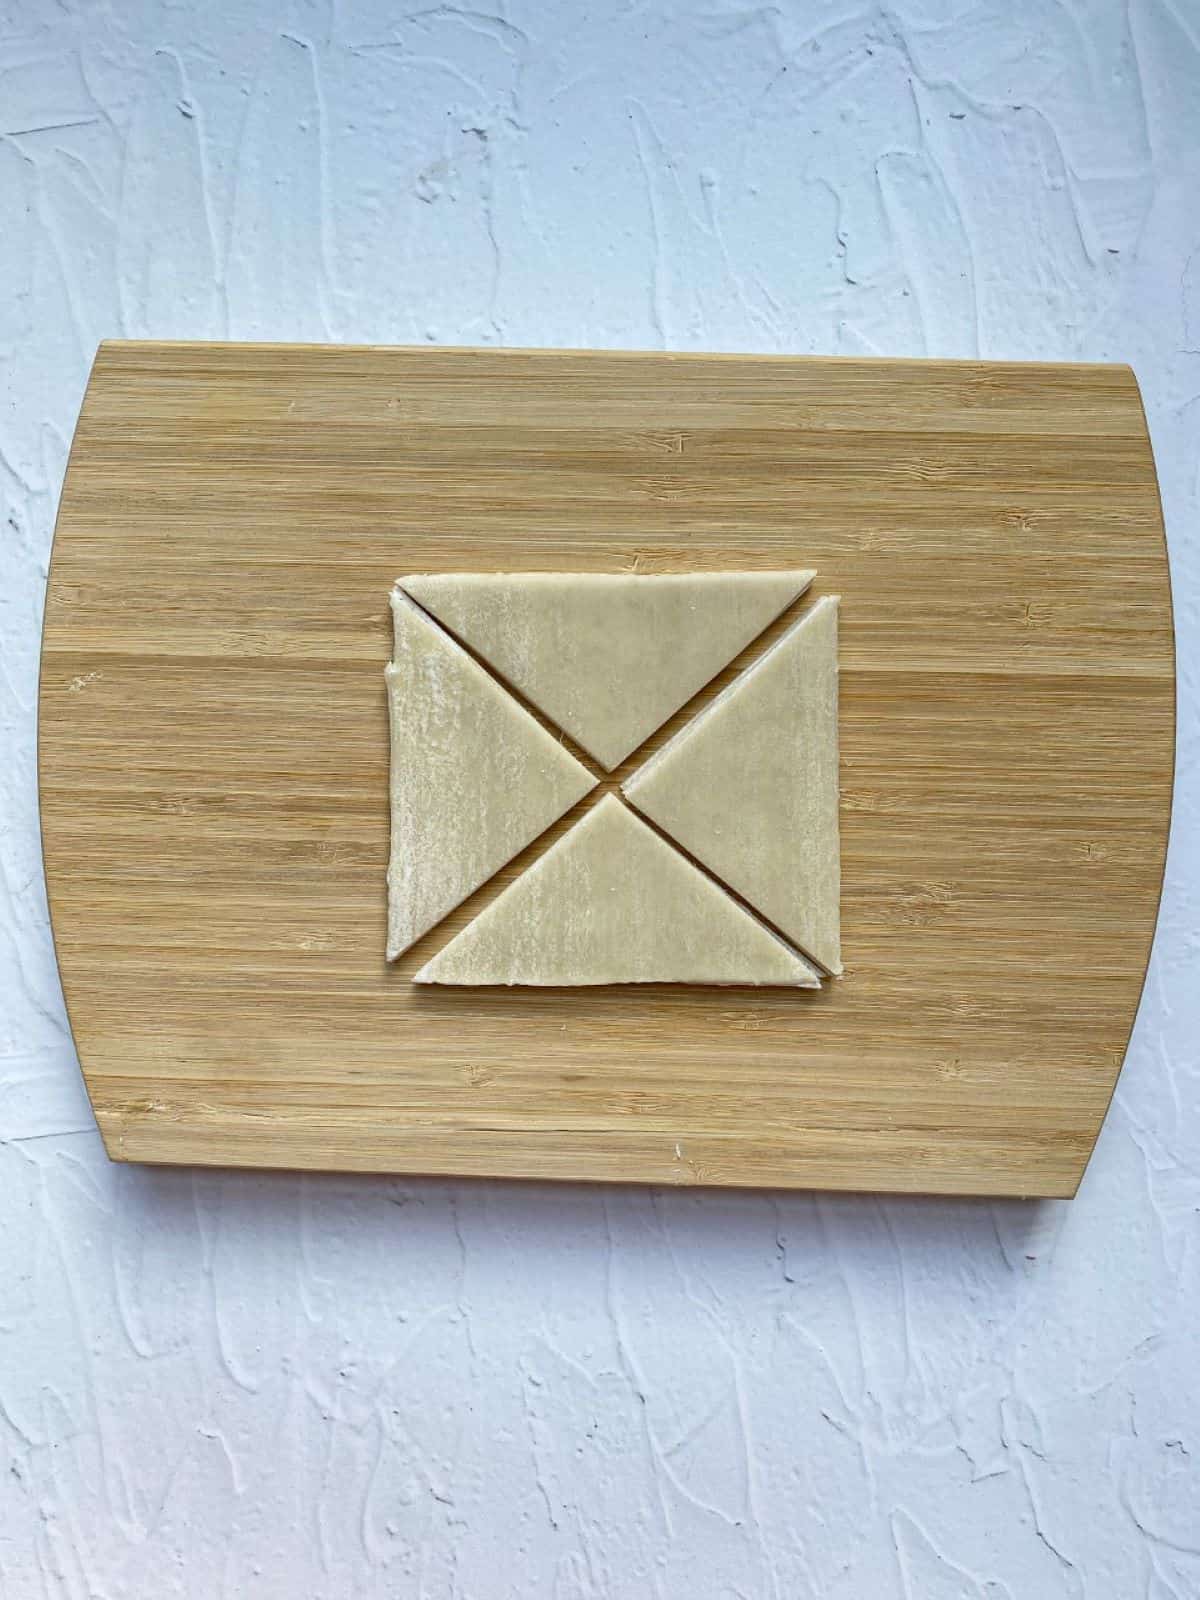 A wonton wrapper on a cutting board cut into four triangle shaped chips.